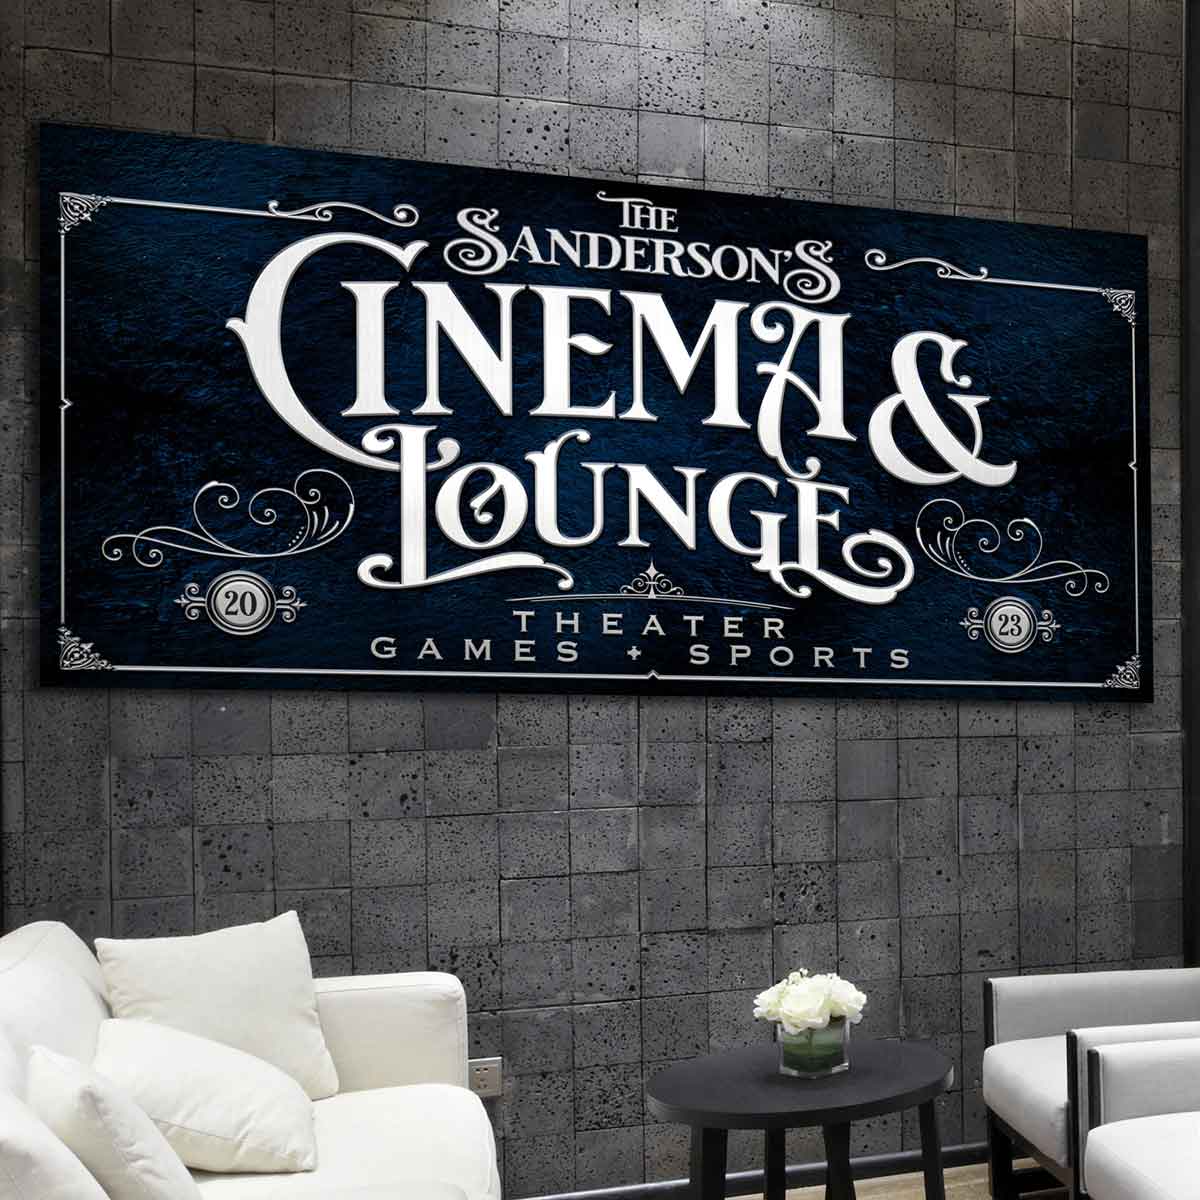 Personalized Home Cinema Lounge Sign with Intricate font and elegant details 